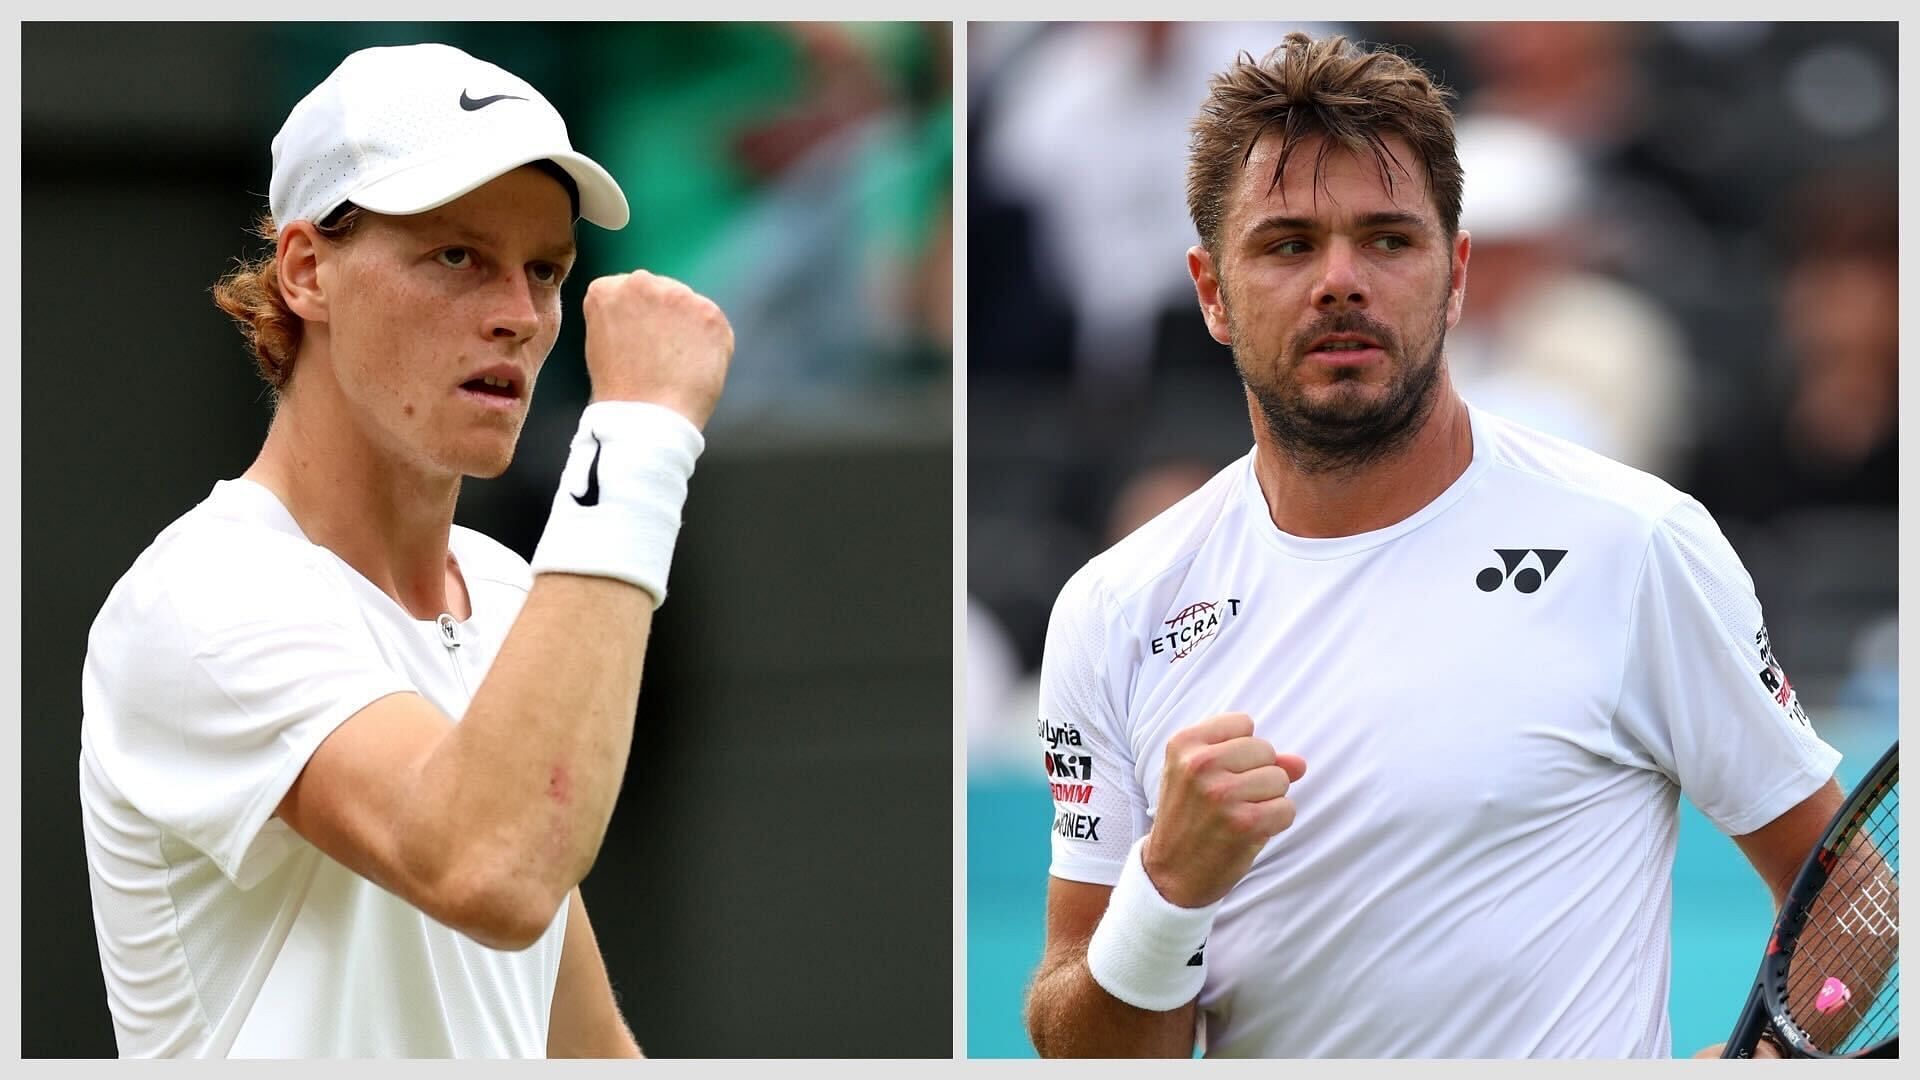 Jannik Sinner vs Stan Wawrinka is one of the third-round matches at the 2023 US Open.